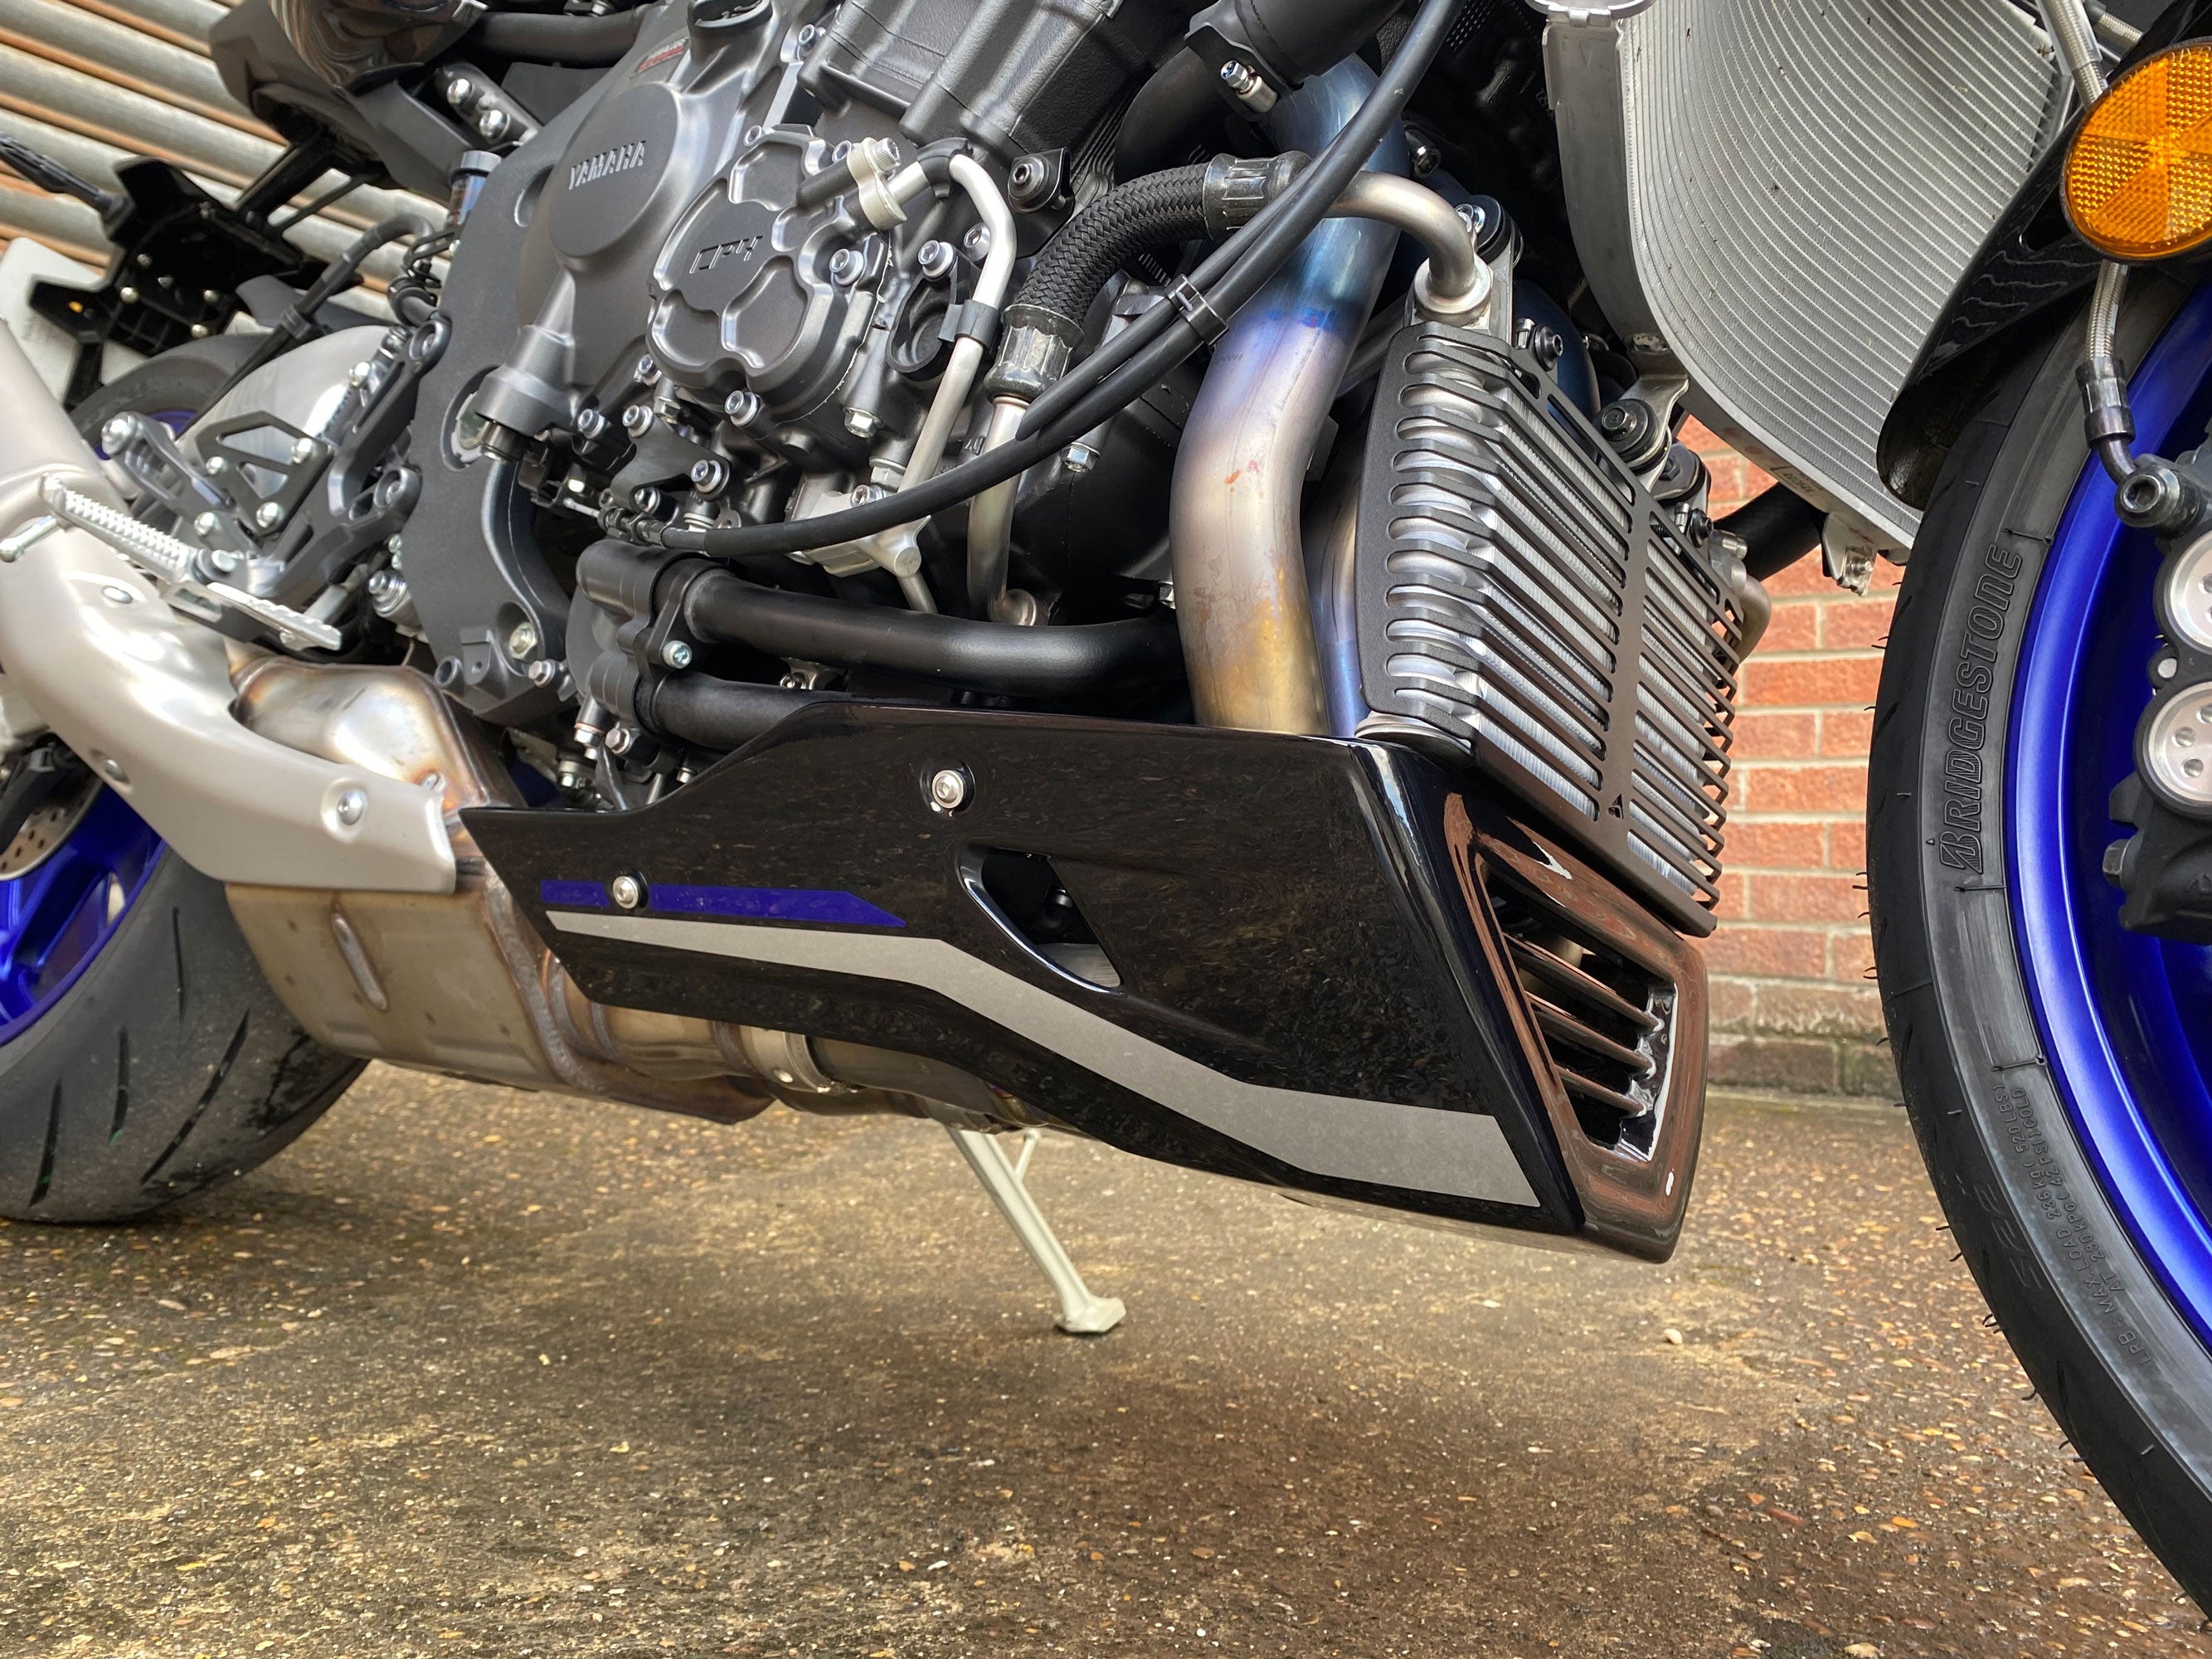 Pyramid Belly Pan | Gloss Black | Yamaha MT-10 2016>Current-22170B-Belly Pans-Pyramid Motorcycle Accessories